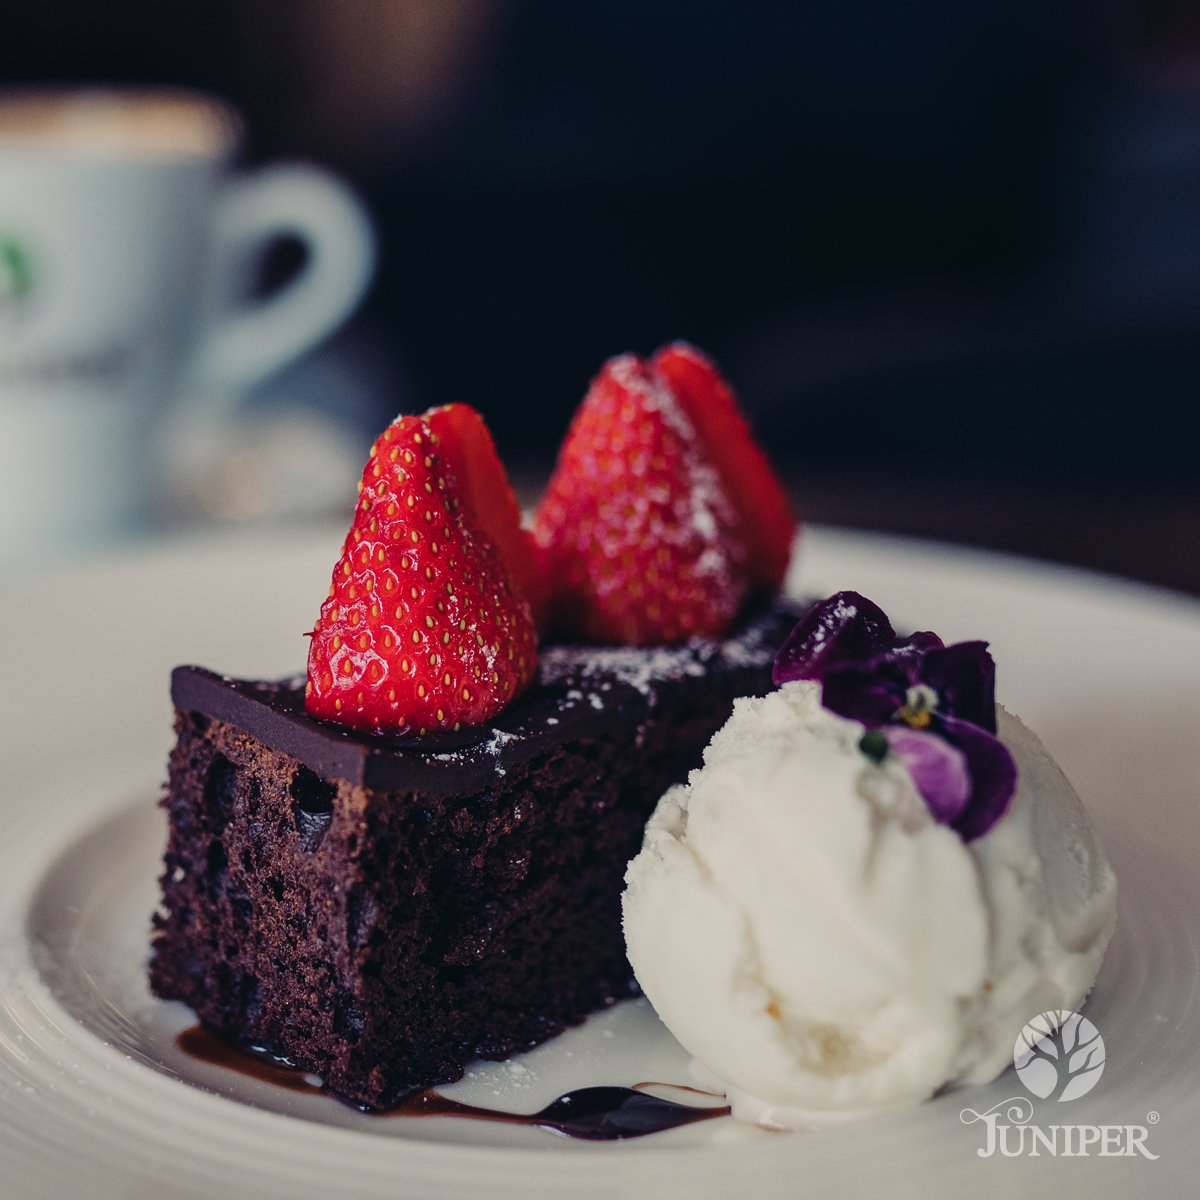 Fancy a #sweet #treat this #Sunday?
How about our #ChocolateFudgeBrownie, served with luxury ice cream!
🇧🇪🍫🍪🍓😋
#cake #cakeandcoffee #sweets #treats #brunch #lunch #latelunch
🥇 of 28 #Hale #Restaurants! #Alty #Altrincham #HaleBarns #Bowdon #Cheshire #CheshireFood